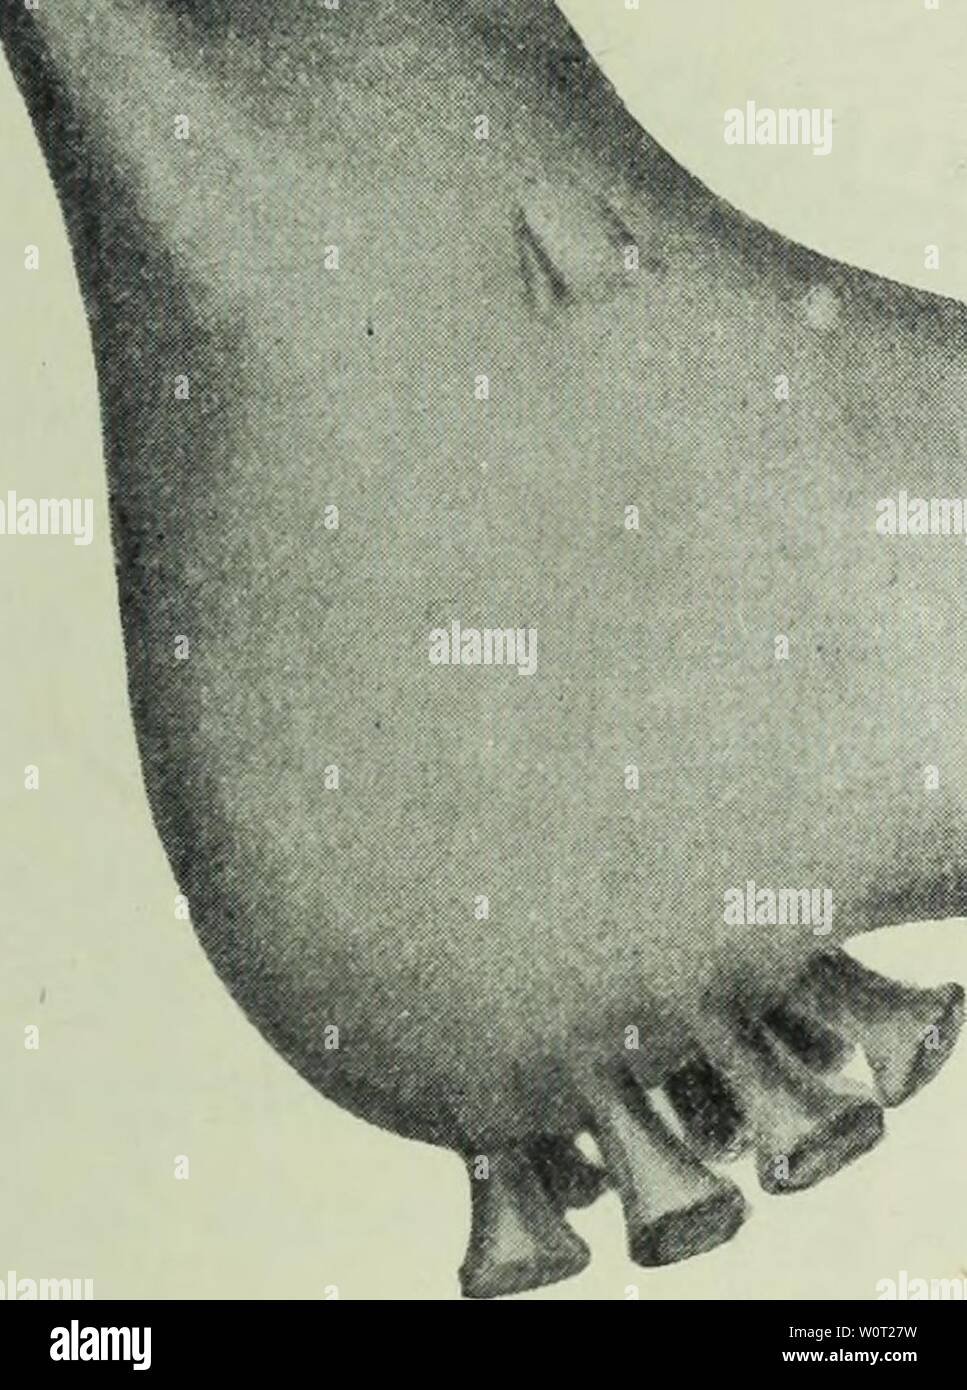 Archive image from page 578 of The depths of the ocean;. The depths of the ocean; a general account of the modern science of oceanography based largely on the scientific researches of the Norwegian steamer Michael Sars in the North Atlantic depthsofoceange00murr Year: 1912  Fig. 384. Deima fastosi/m, Theel. ' Michael Sars, Station 48. 1910, tarda, Pontophilus norvegicus, Pagurus pubescens, Calocaris macandrece, Geryon tridens. Worms: Aphrodite aculeata, Lcetmonice ftlicornis, Lumbrinereis fragilis. Brachi- opod ; Waldheimia septata (in large quantities). This list also might easily be extended Stock Photo